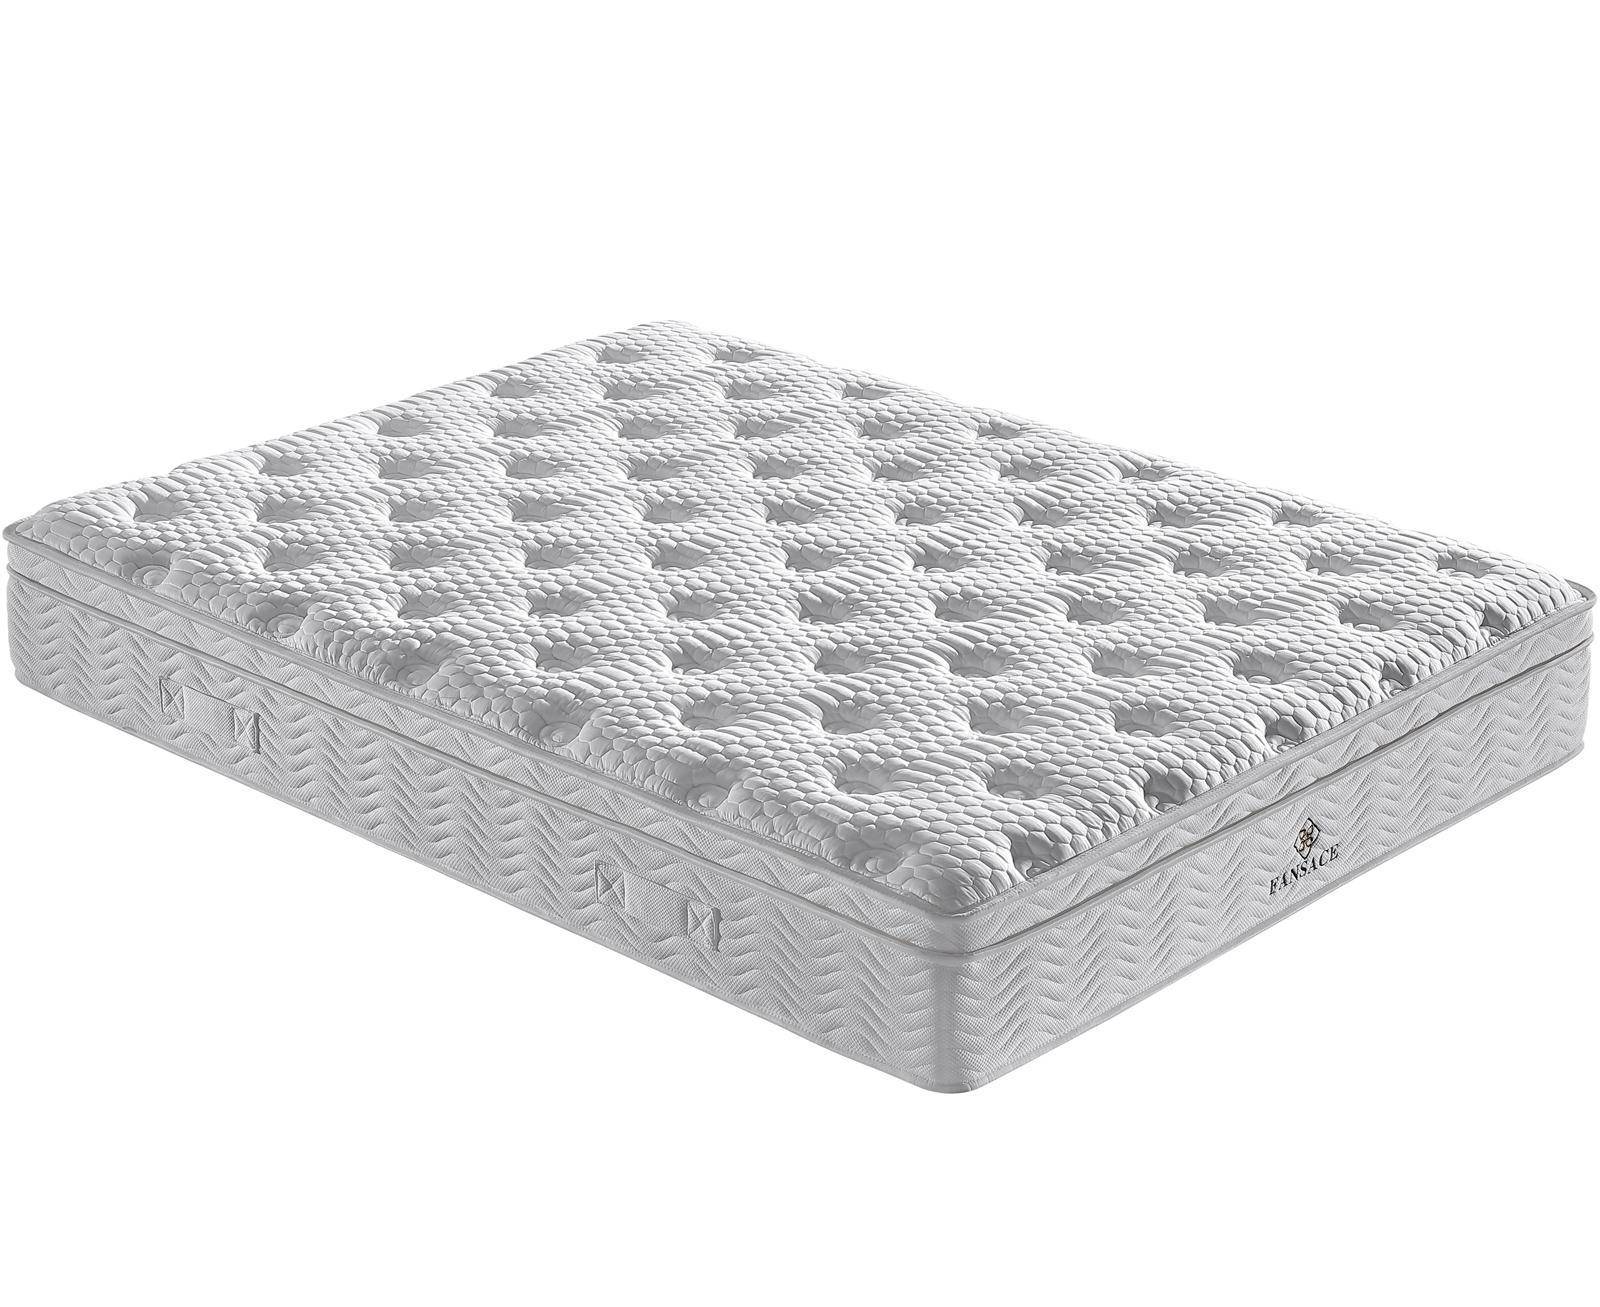 34PA-01 Charcoal Bamboo Latex Hotel Mattress With Memory Foam For Hotel Using